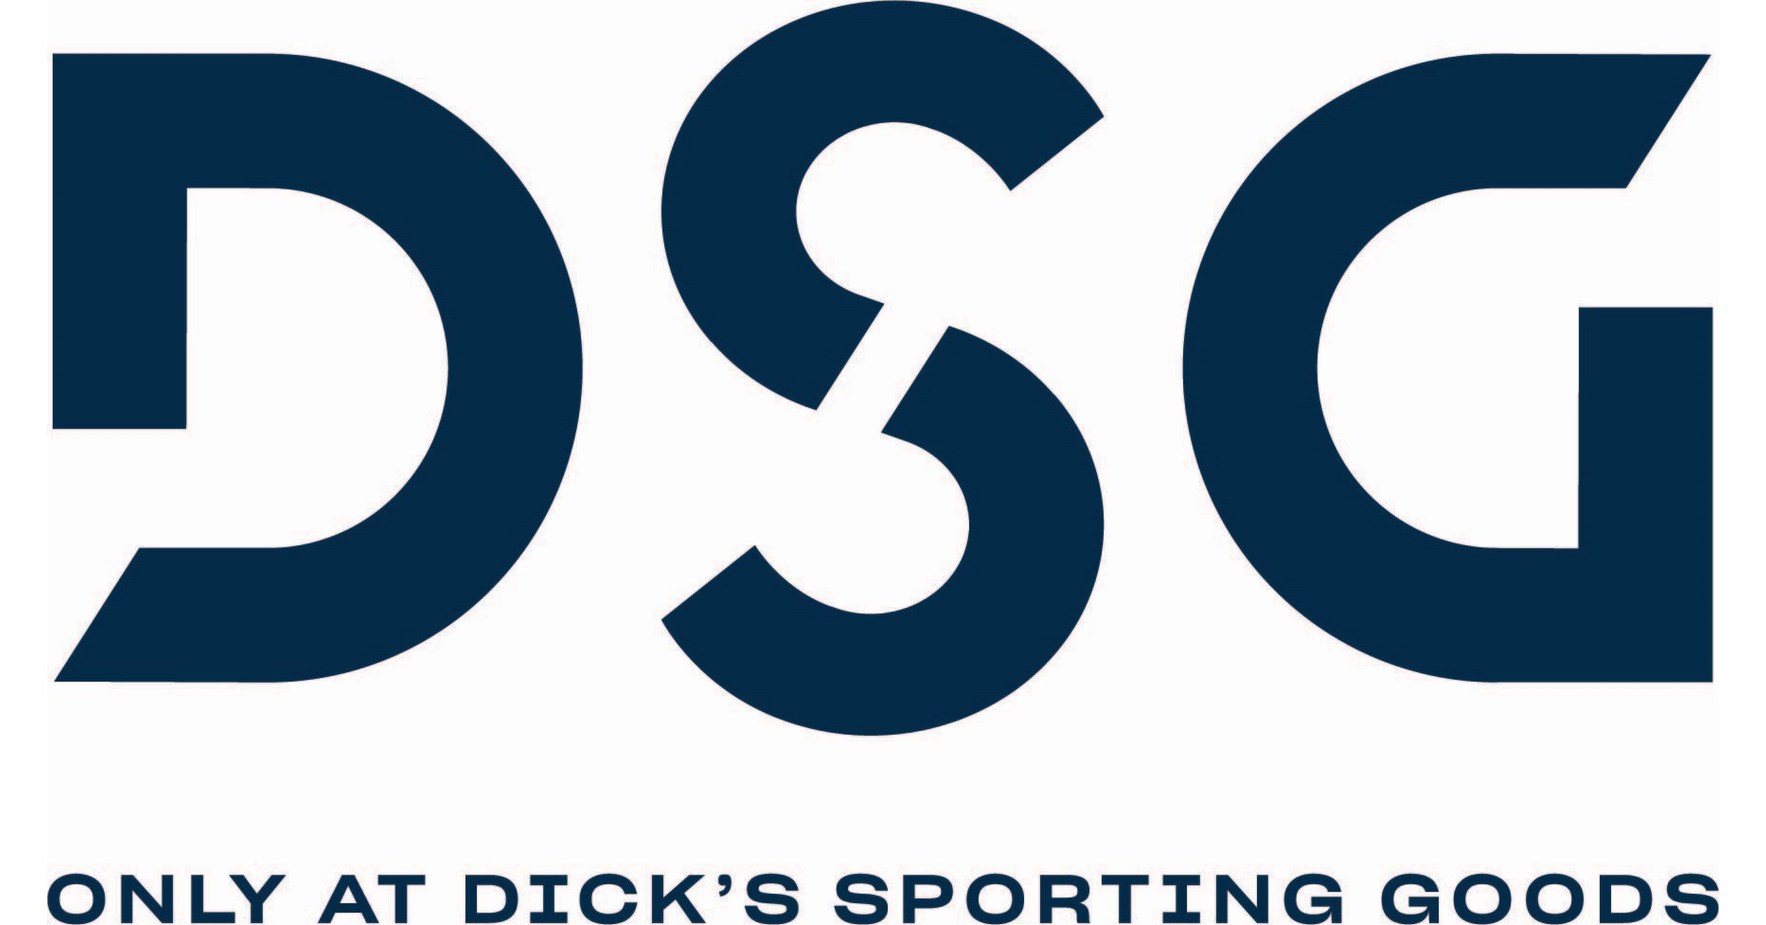 DICK'S Sporting Goods Launches DSG - A New Brand Created For